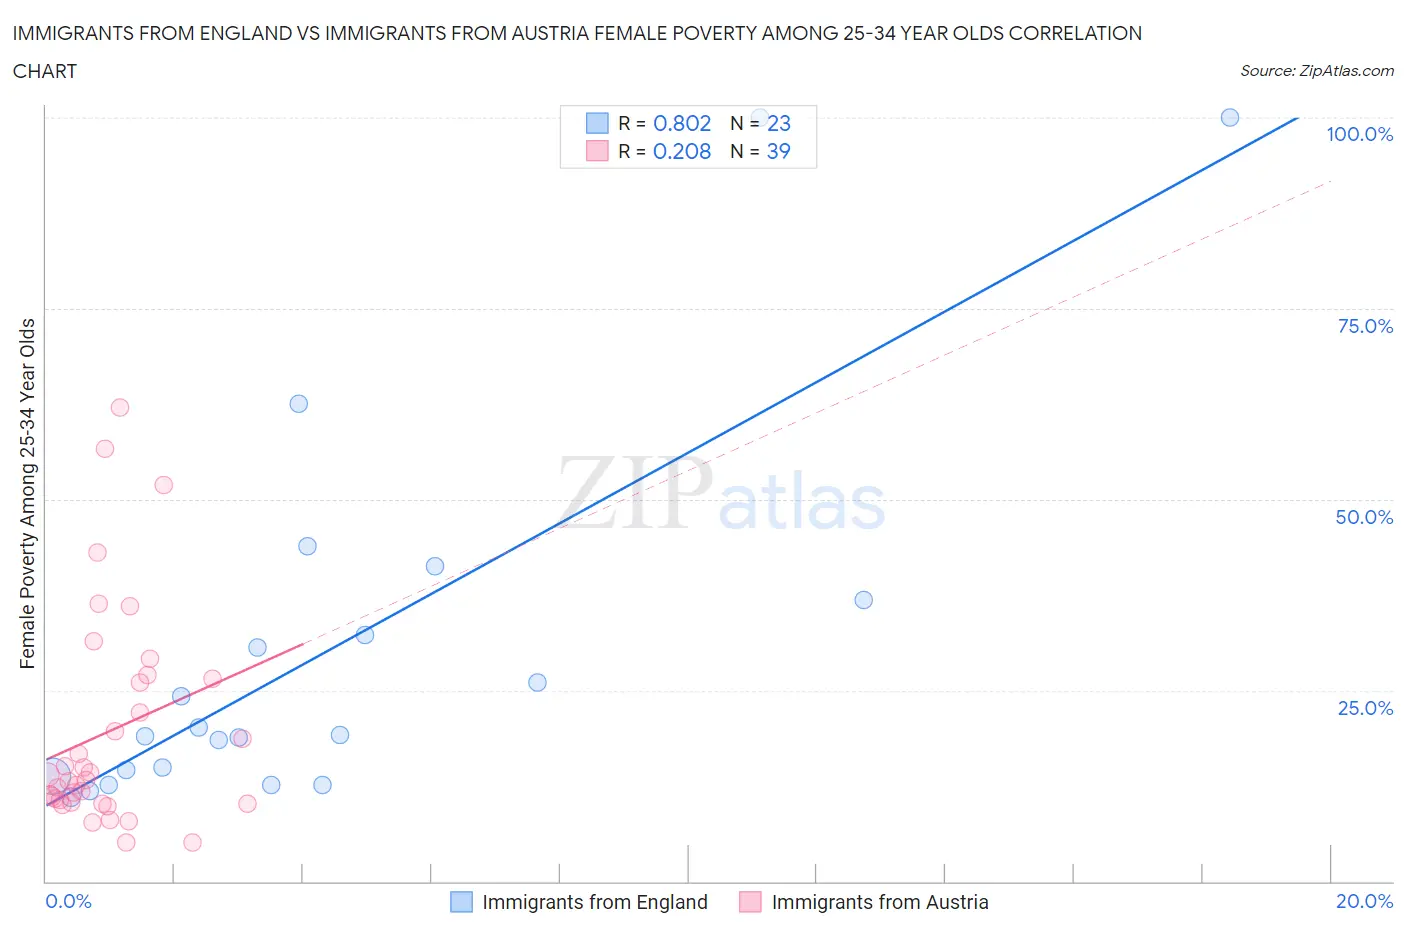 Immigrants from England vs Immigrants from Austria Female Poverty Among 25-34 Year Olds